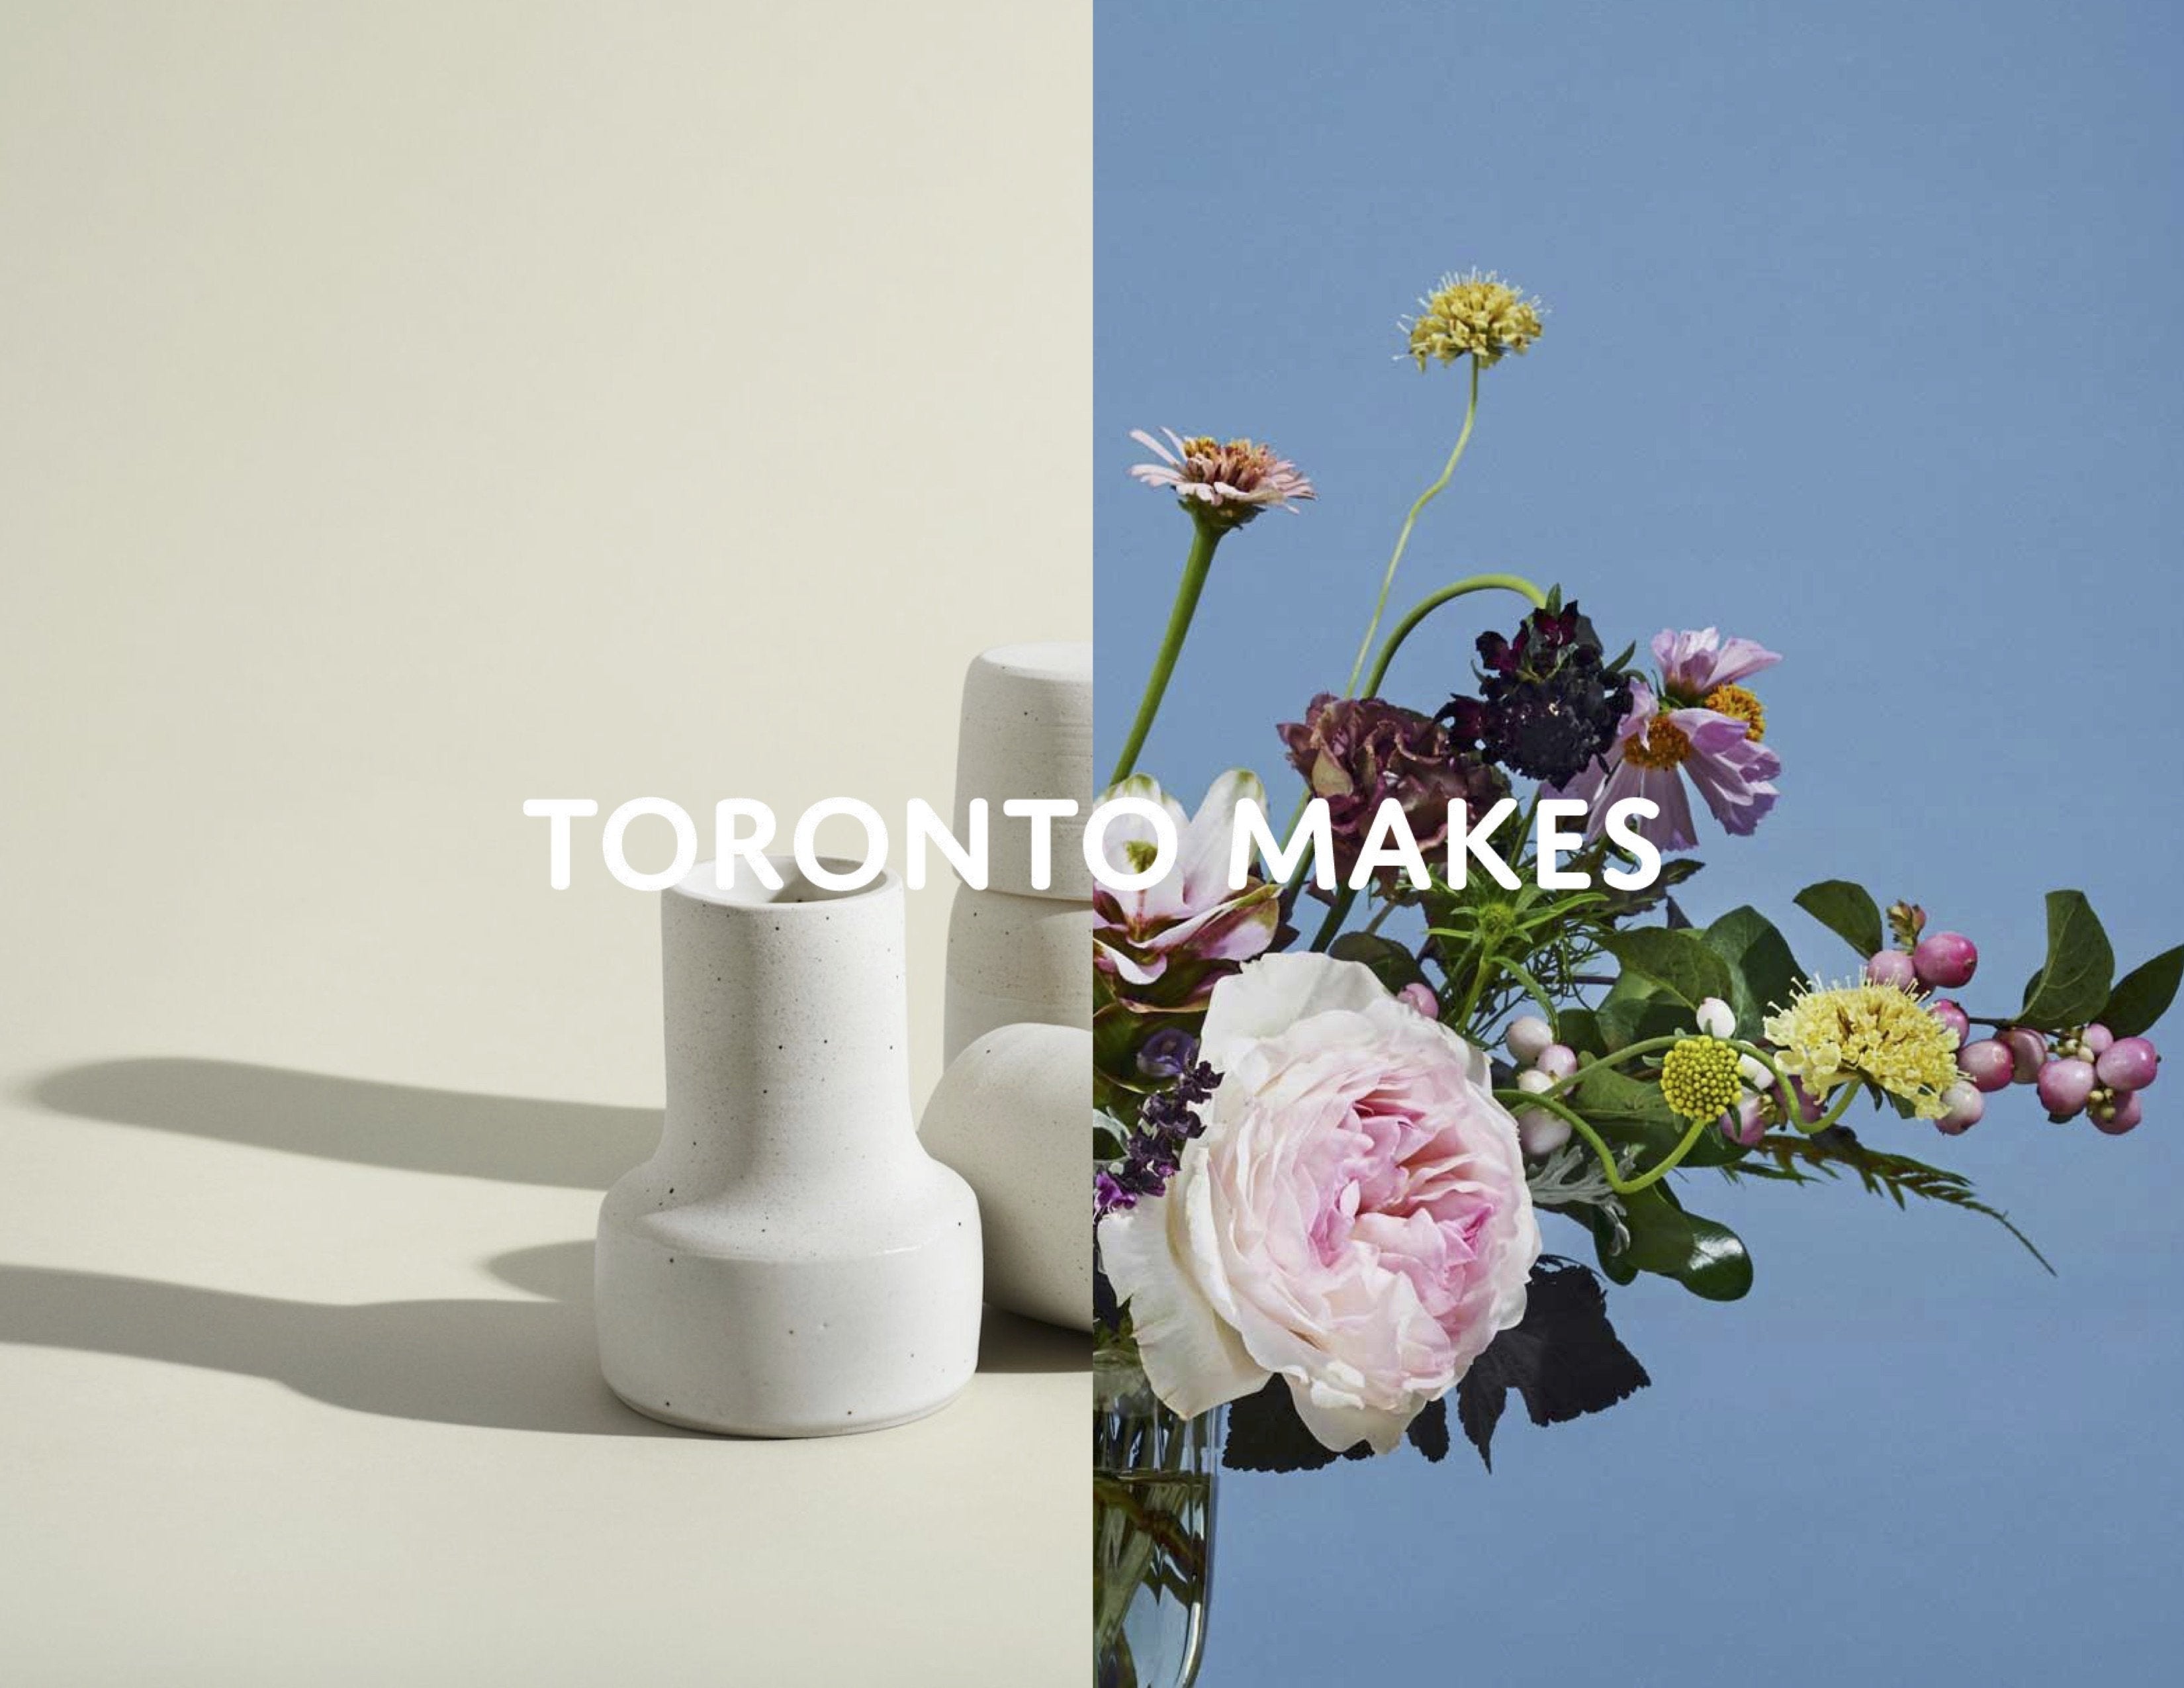 Why we love Toronto makers and the Toronto Makes project!